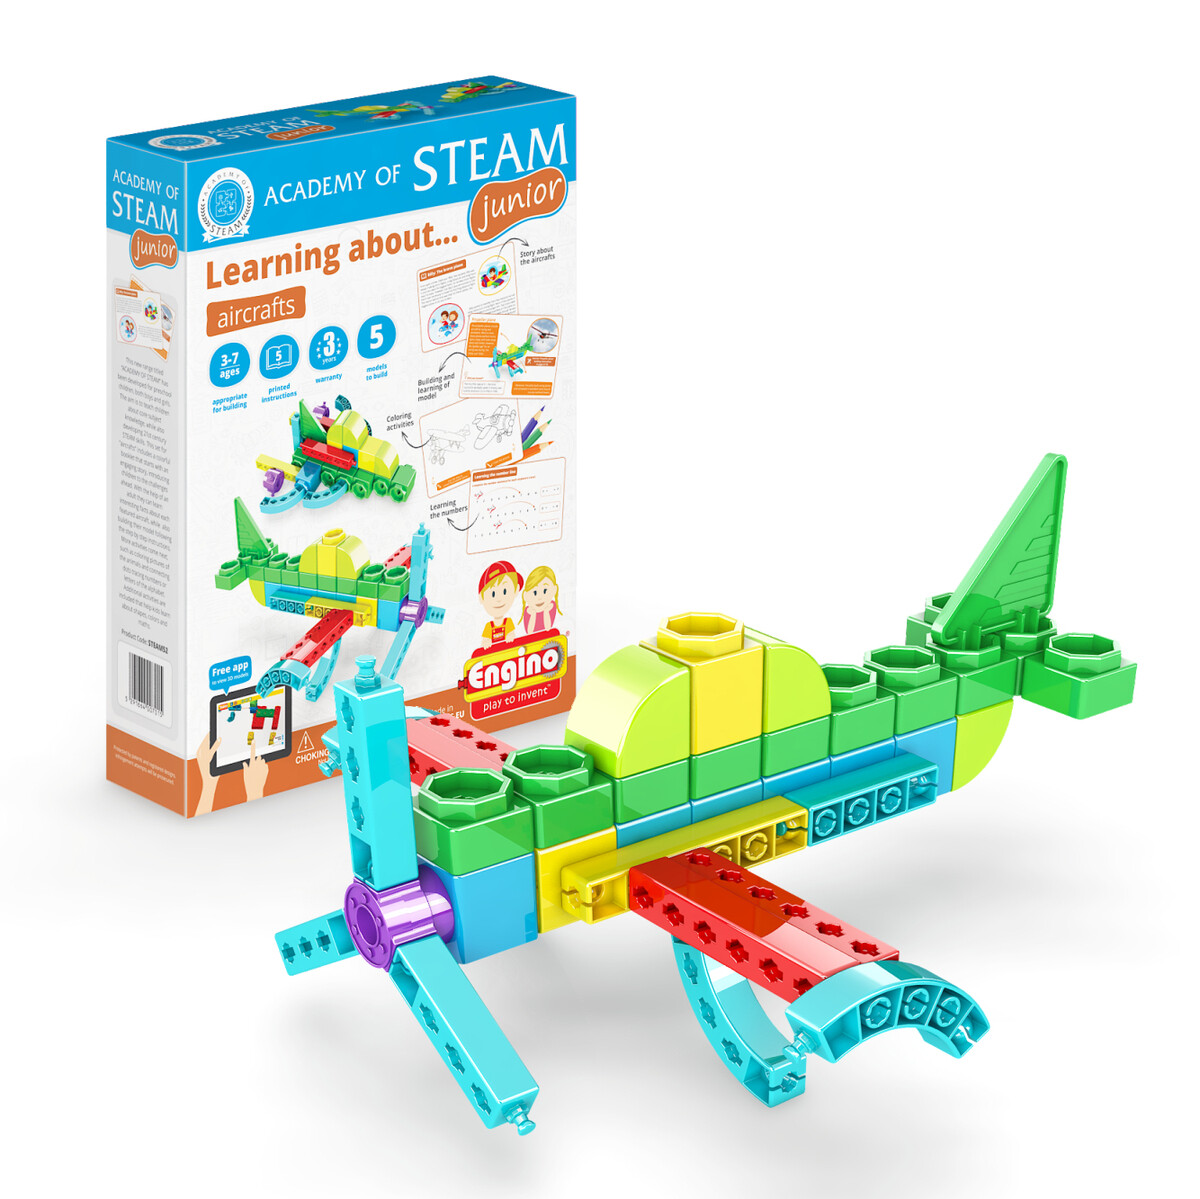 Engino Academy of STEAM Jnr - Qboidz Learning about Aircrafts for ages 3 - 7